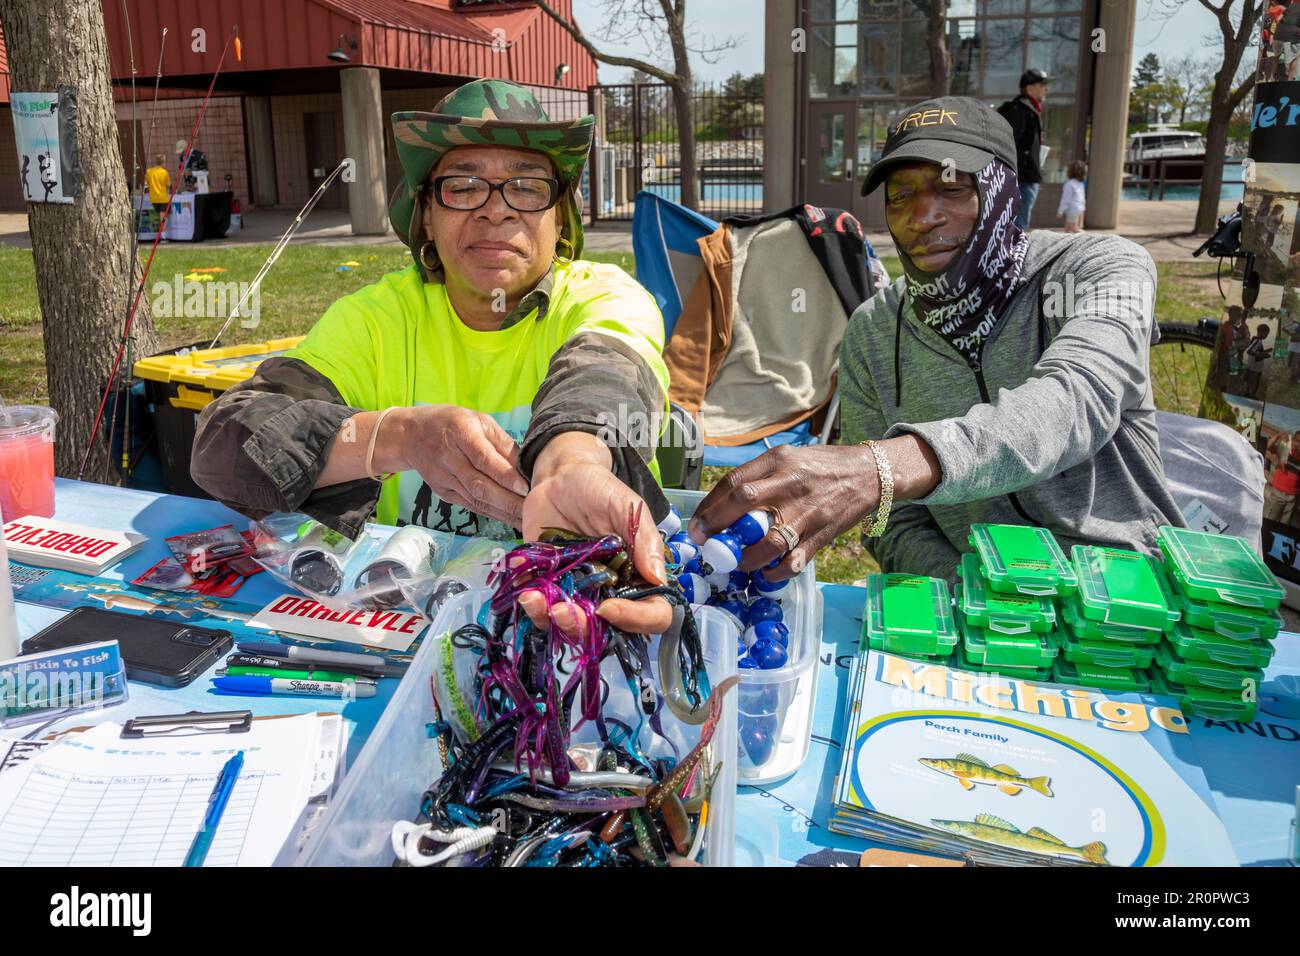 Detroit, Michigan - Members of 'We Fixin to Fish' show lures and other equipment at Milliken State Park. The group teaches children 'the basics and jo Stock Photo